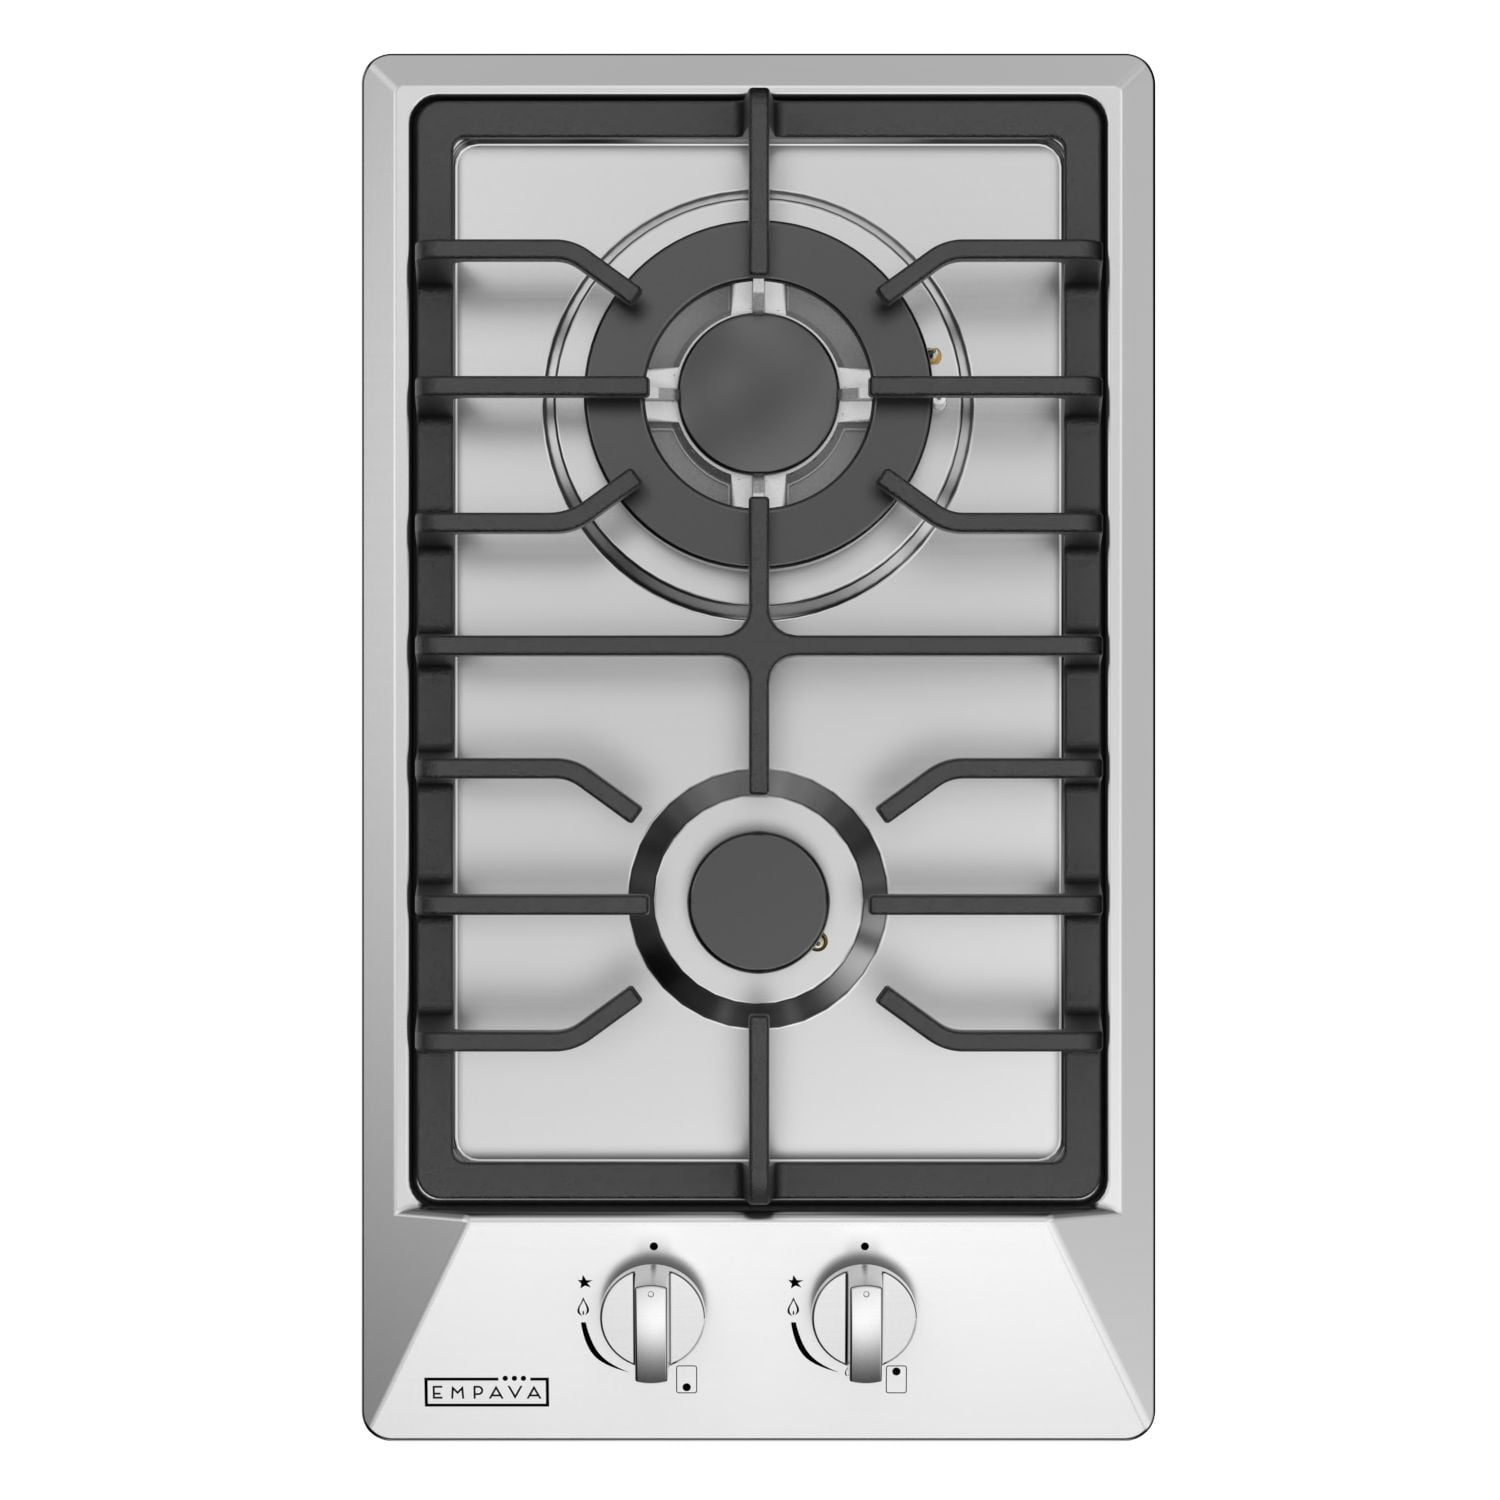 Snokwin Table-top Gas Hob, Black Tempered Glass Gas Cooktop, Home Kitchen  Apartments Gas Cooker, Thermocouple Protection, Easy to Clean